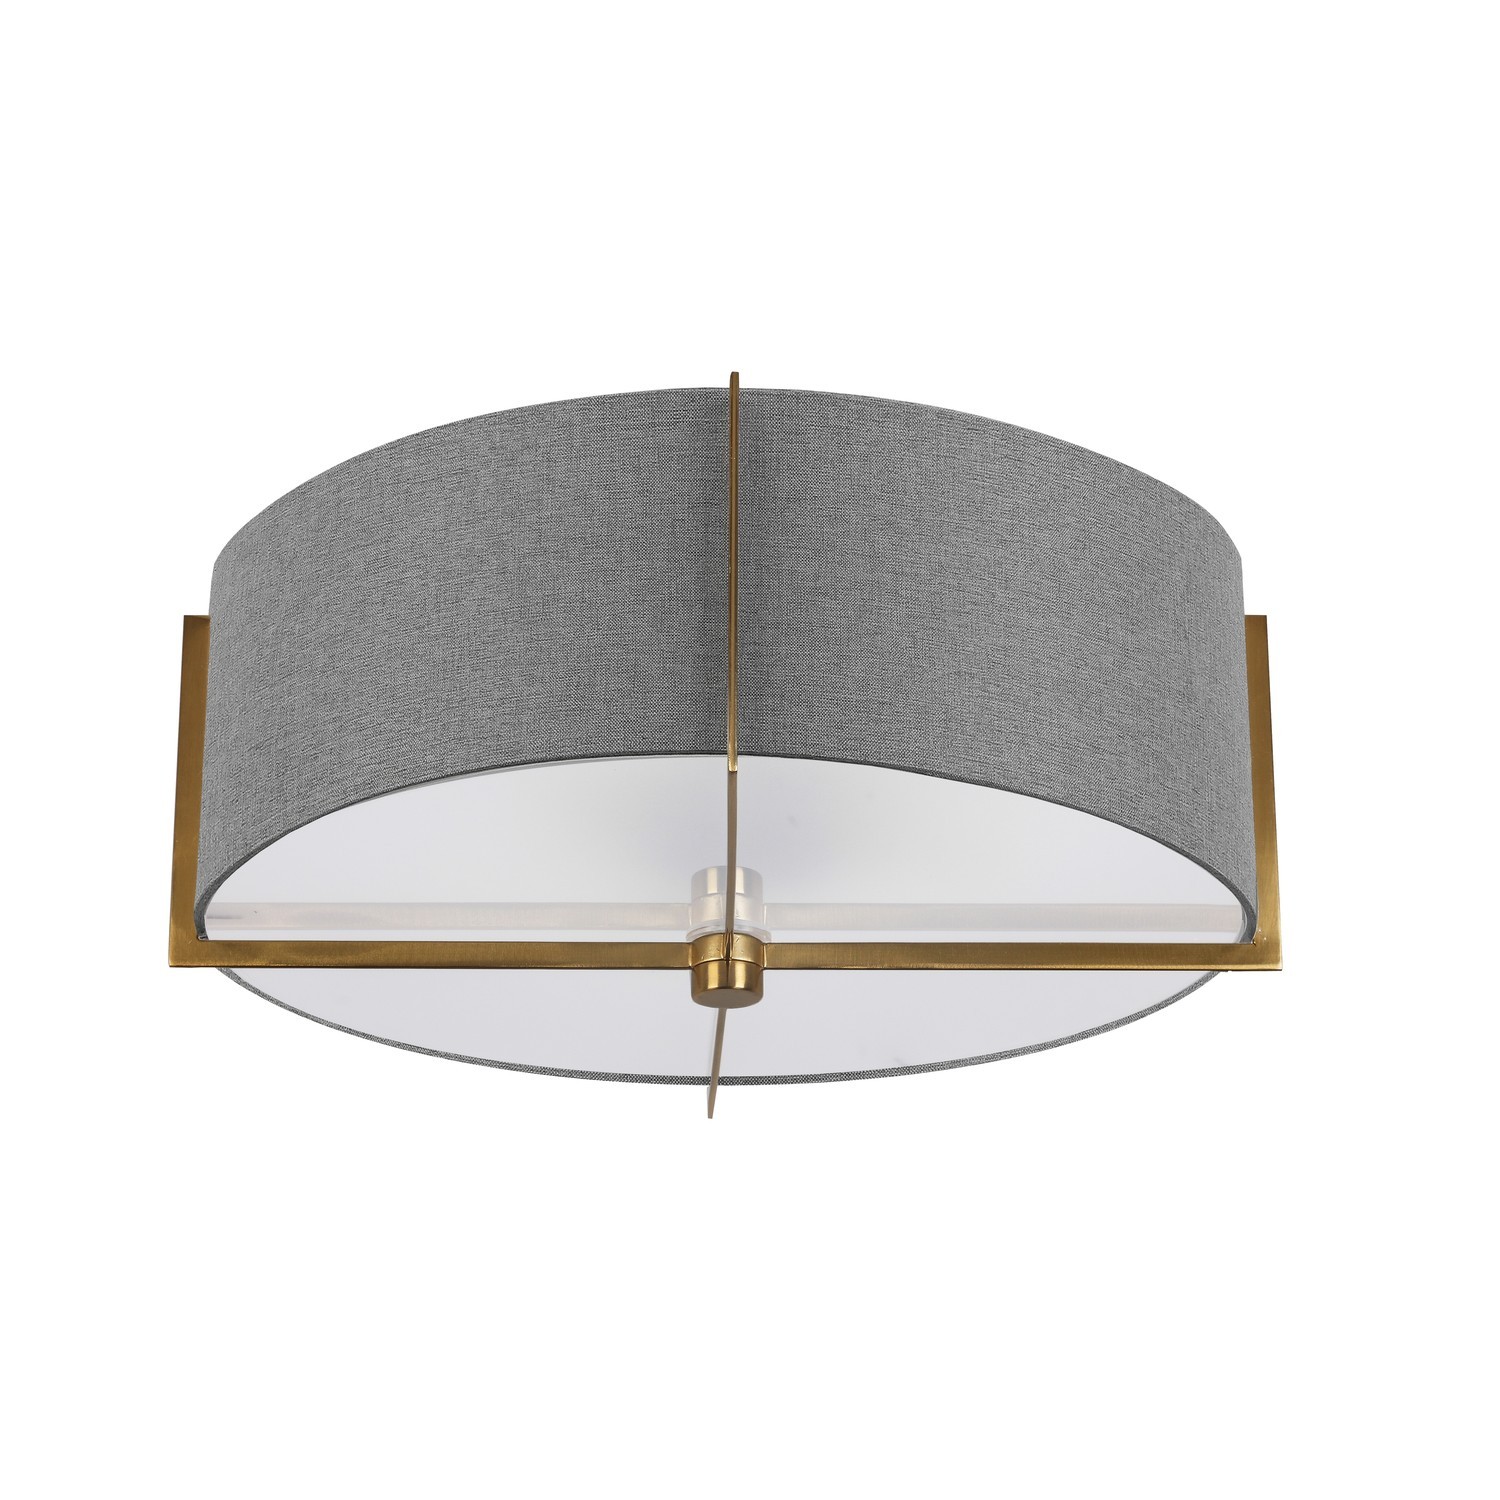 3 Light Incandescent Semi-Flush Mount, Aged Brass with Grey Shad